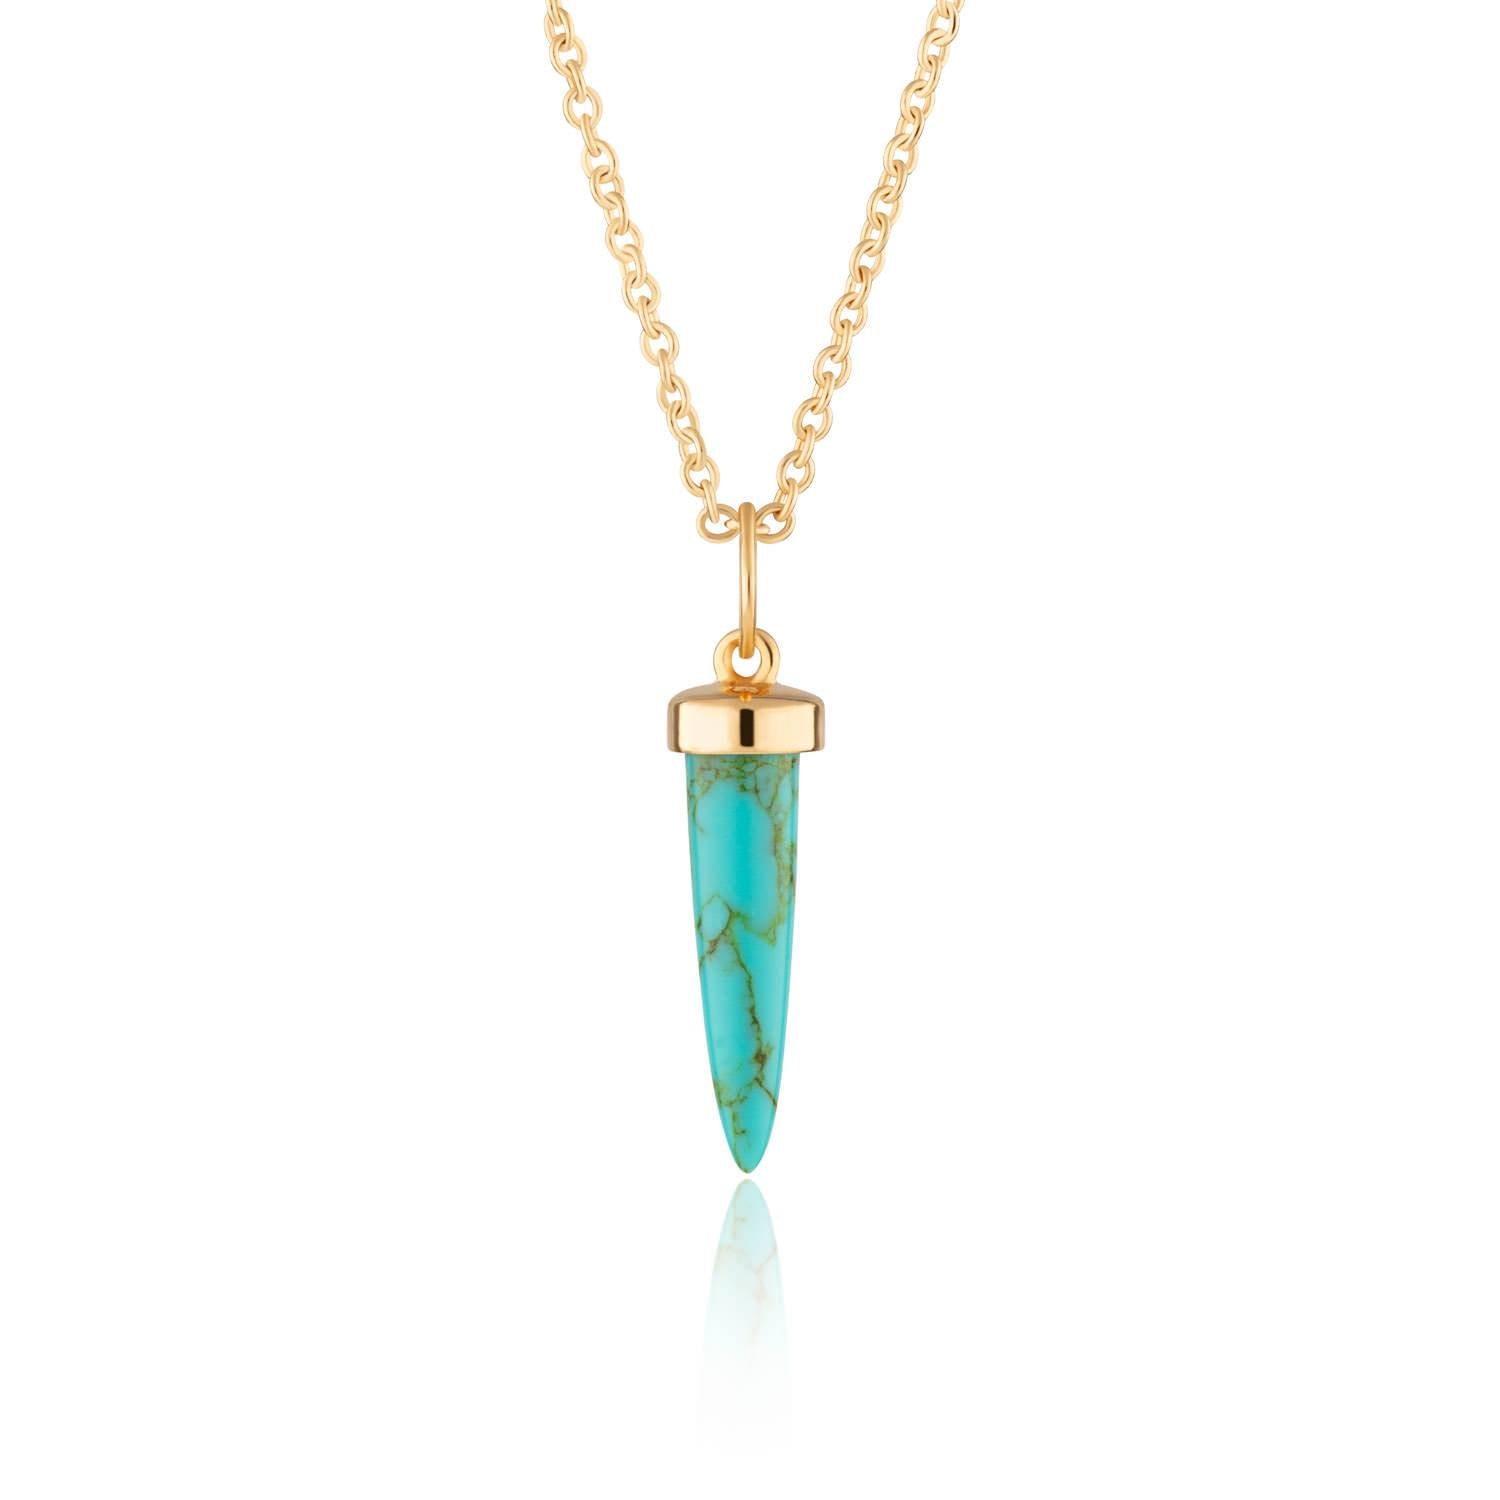 Turquoise Spike Necklace with Slider Clasp